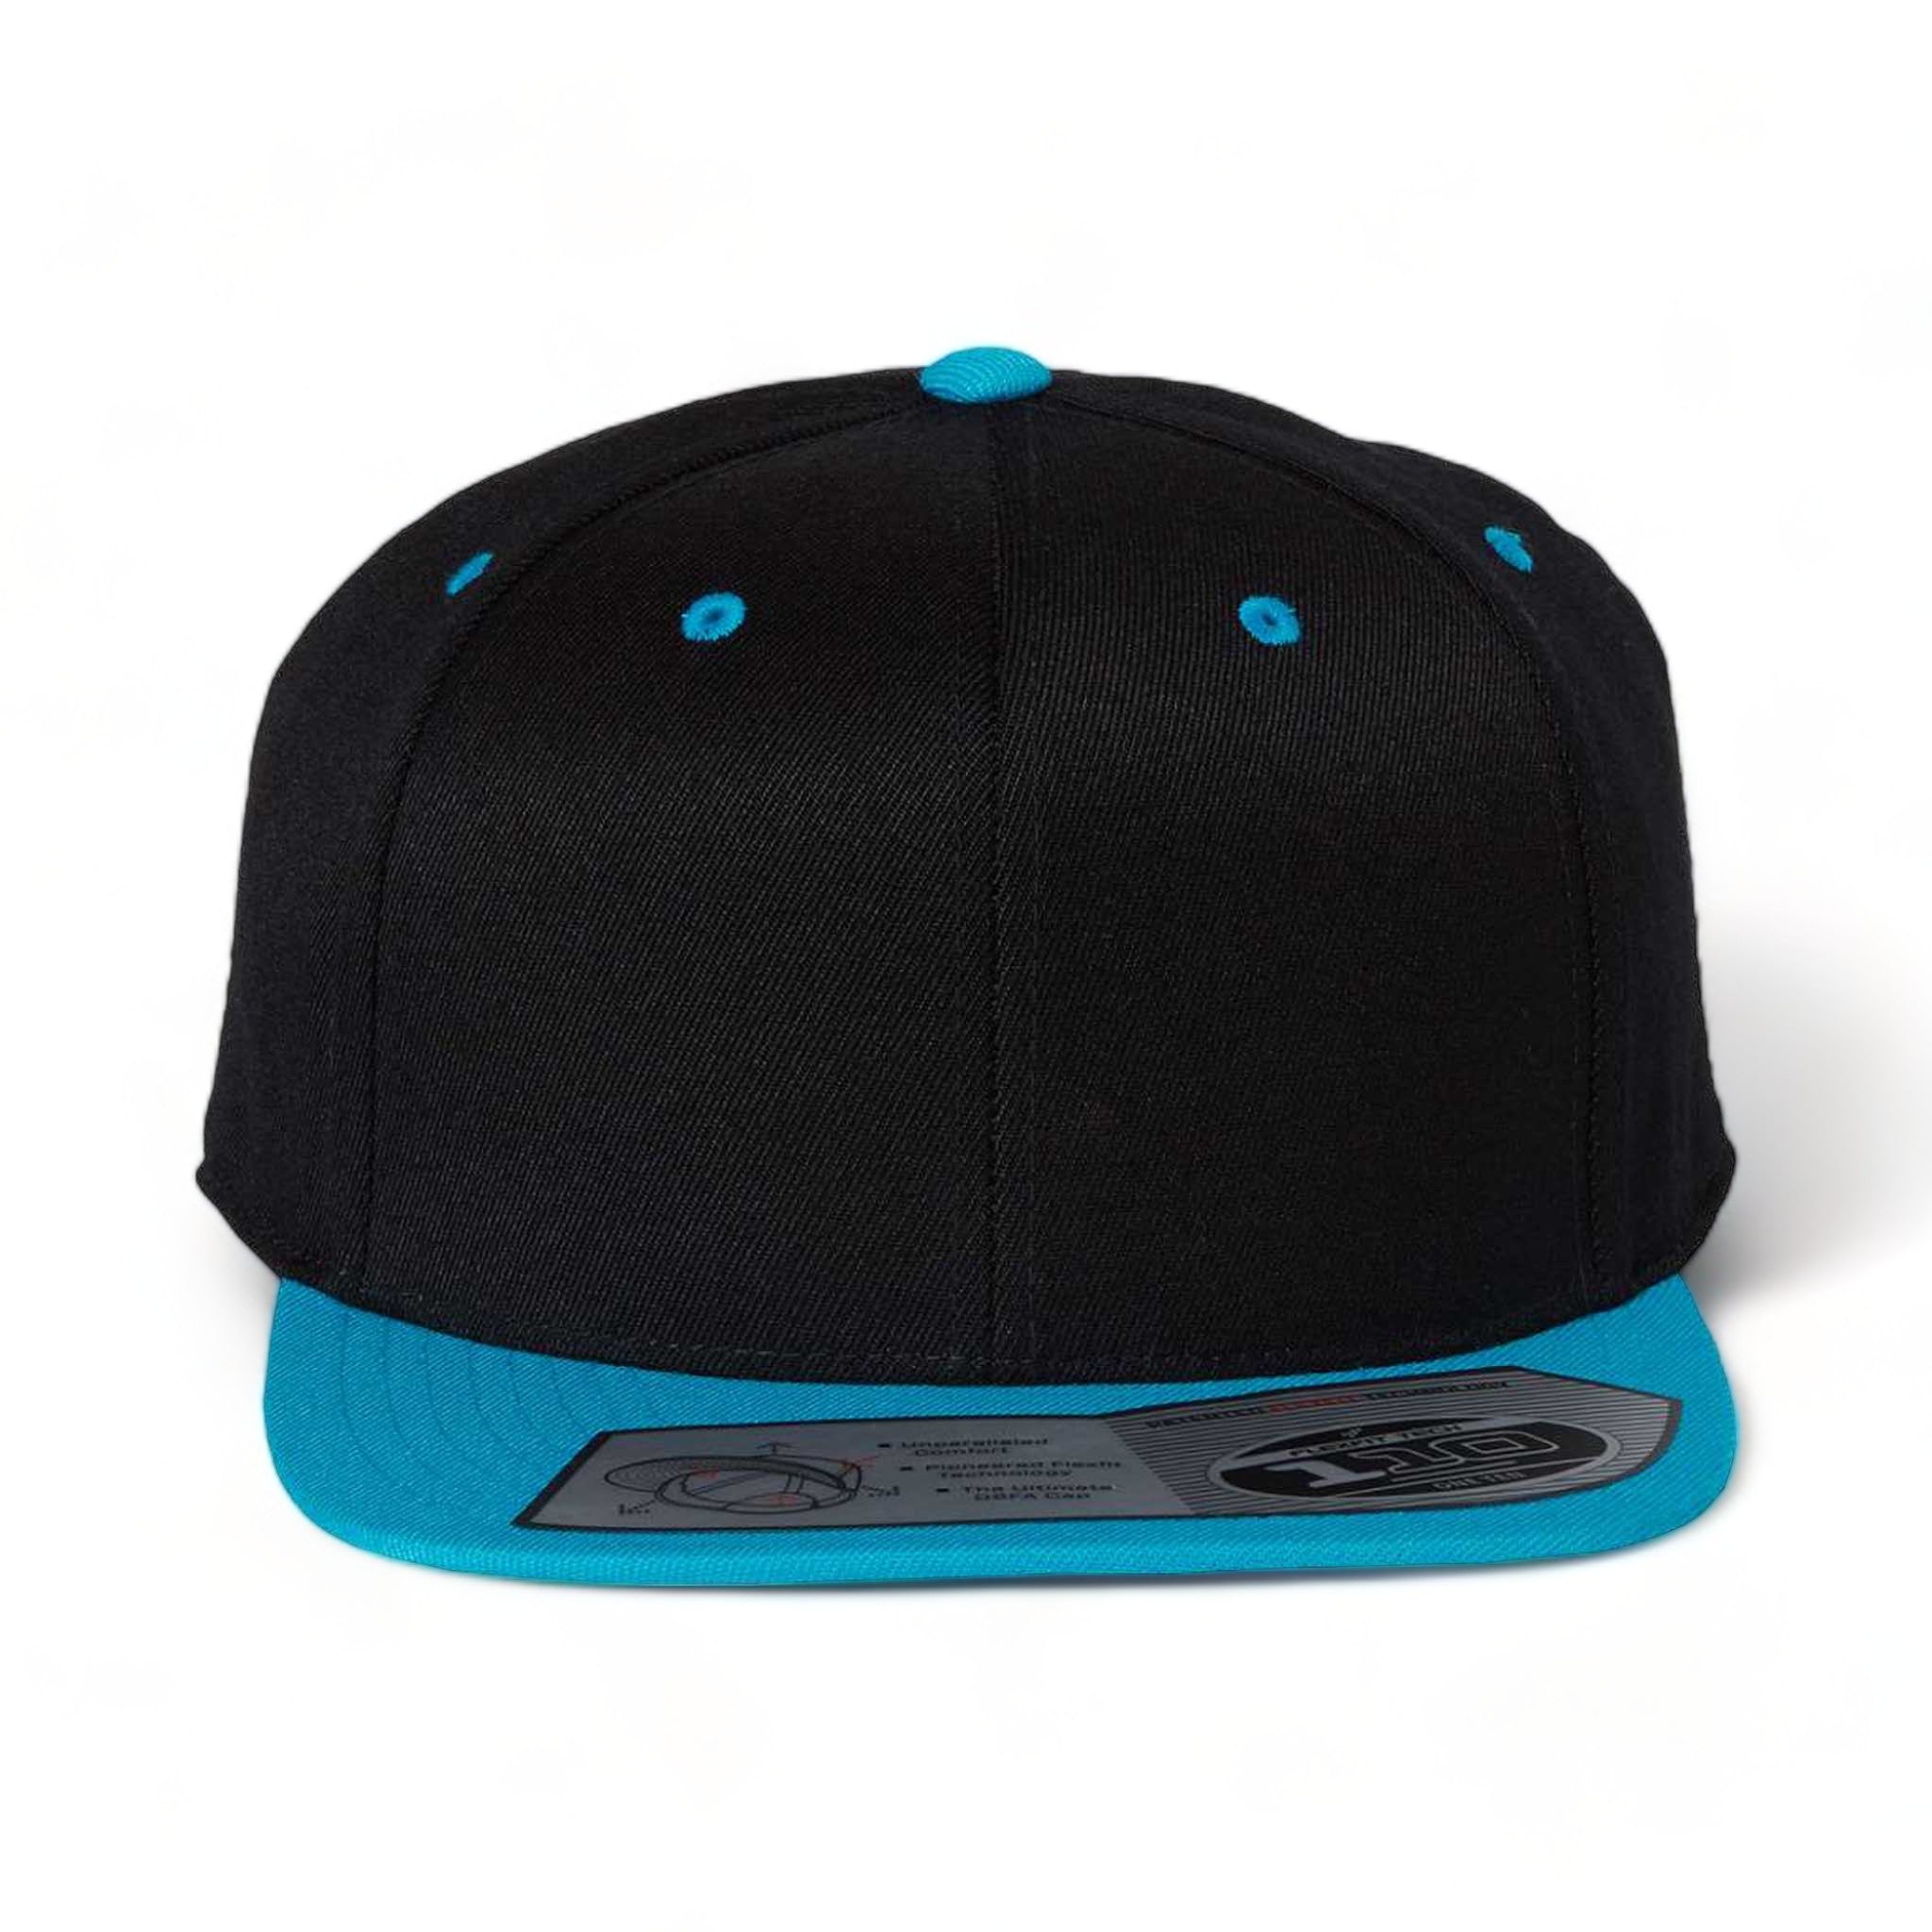 Front view of Flexfit 110F custom hat in black and teal